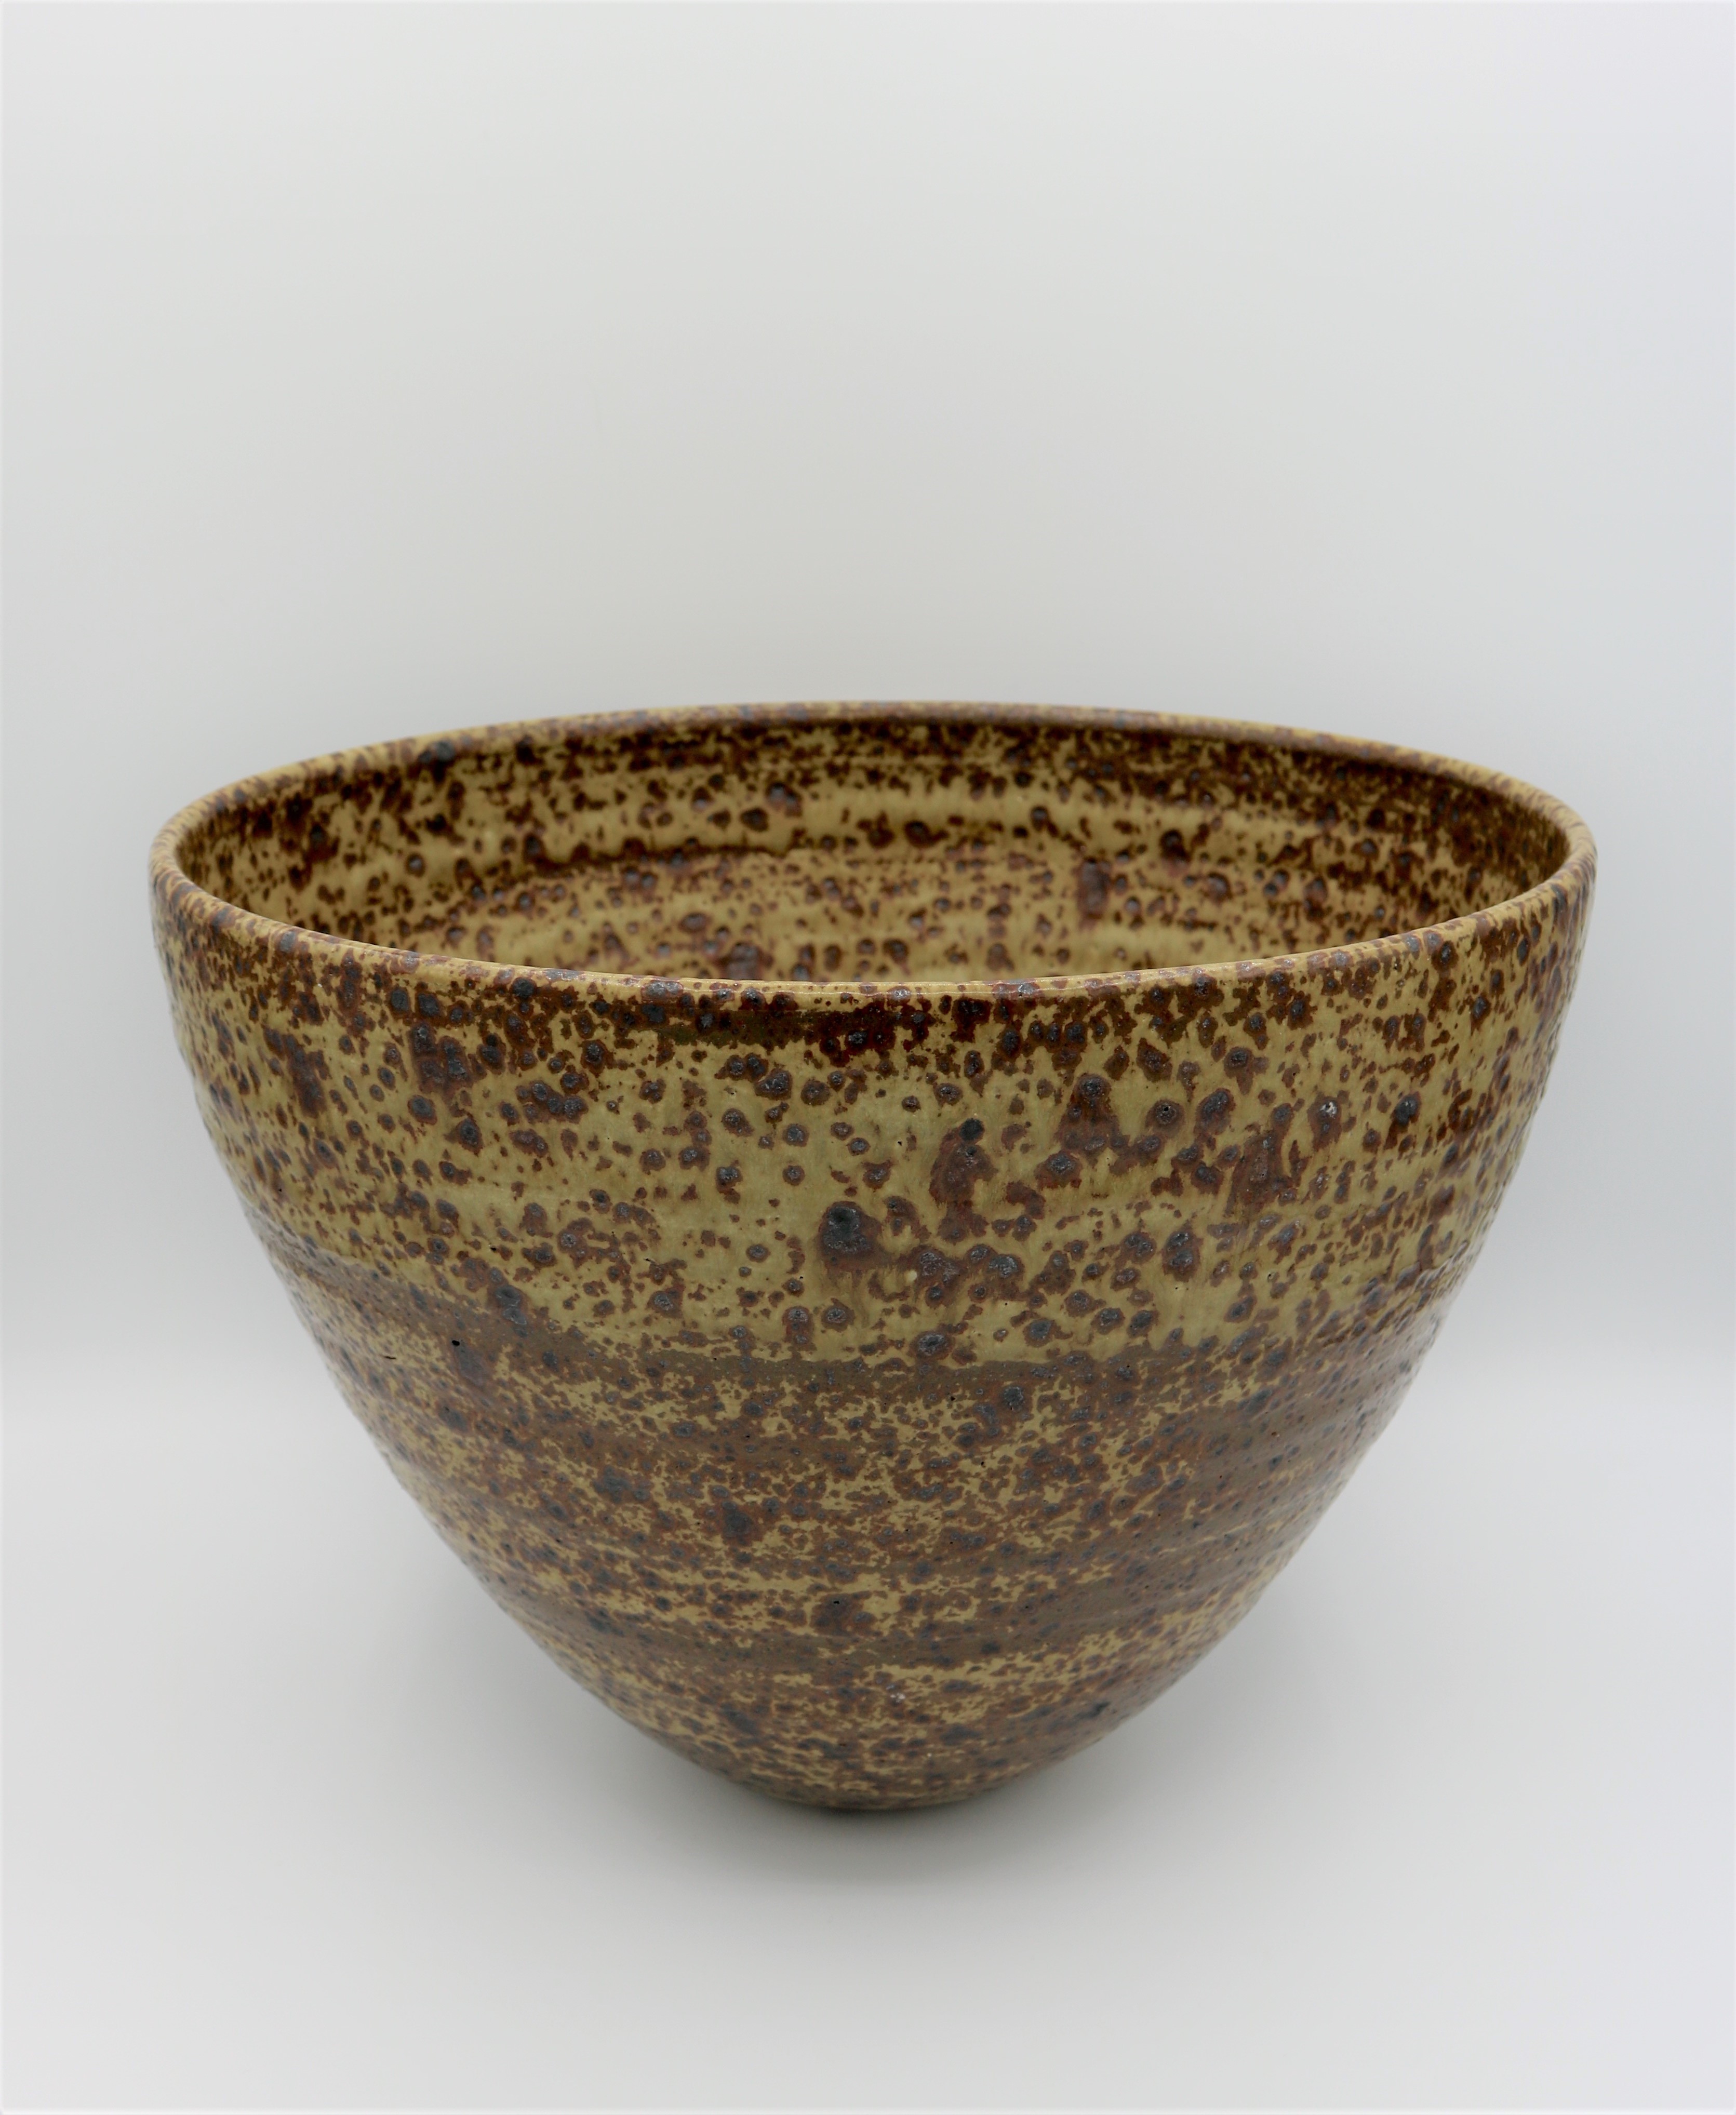 Joanna Constantinidis (1927-2000) A Magnificent Large Early Bowl, circa 1965